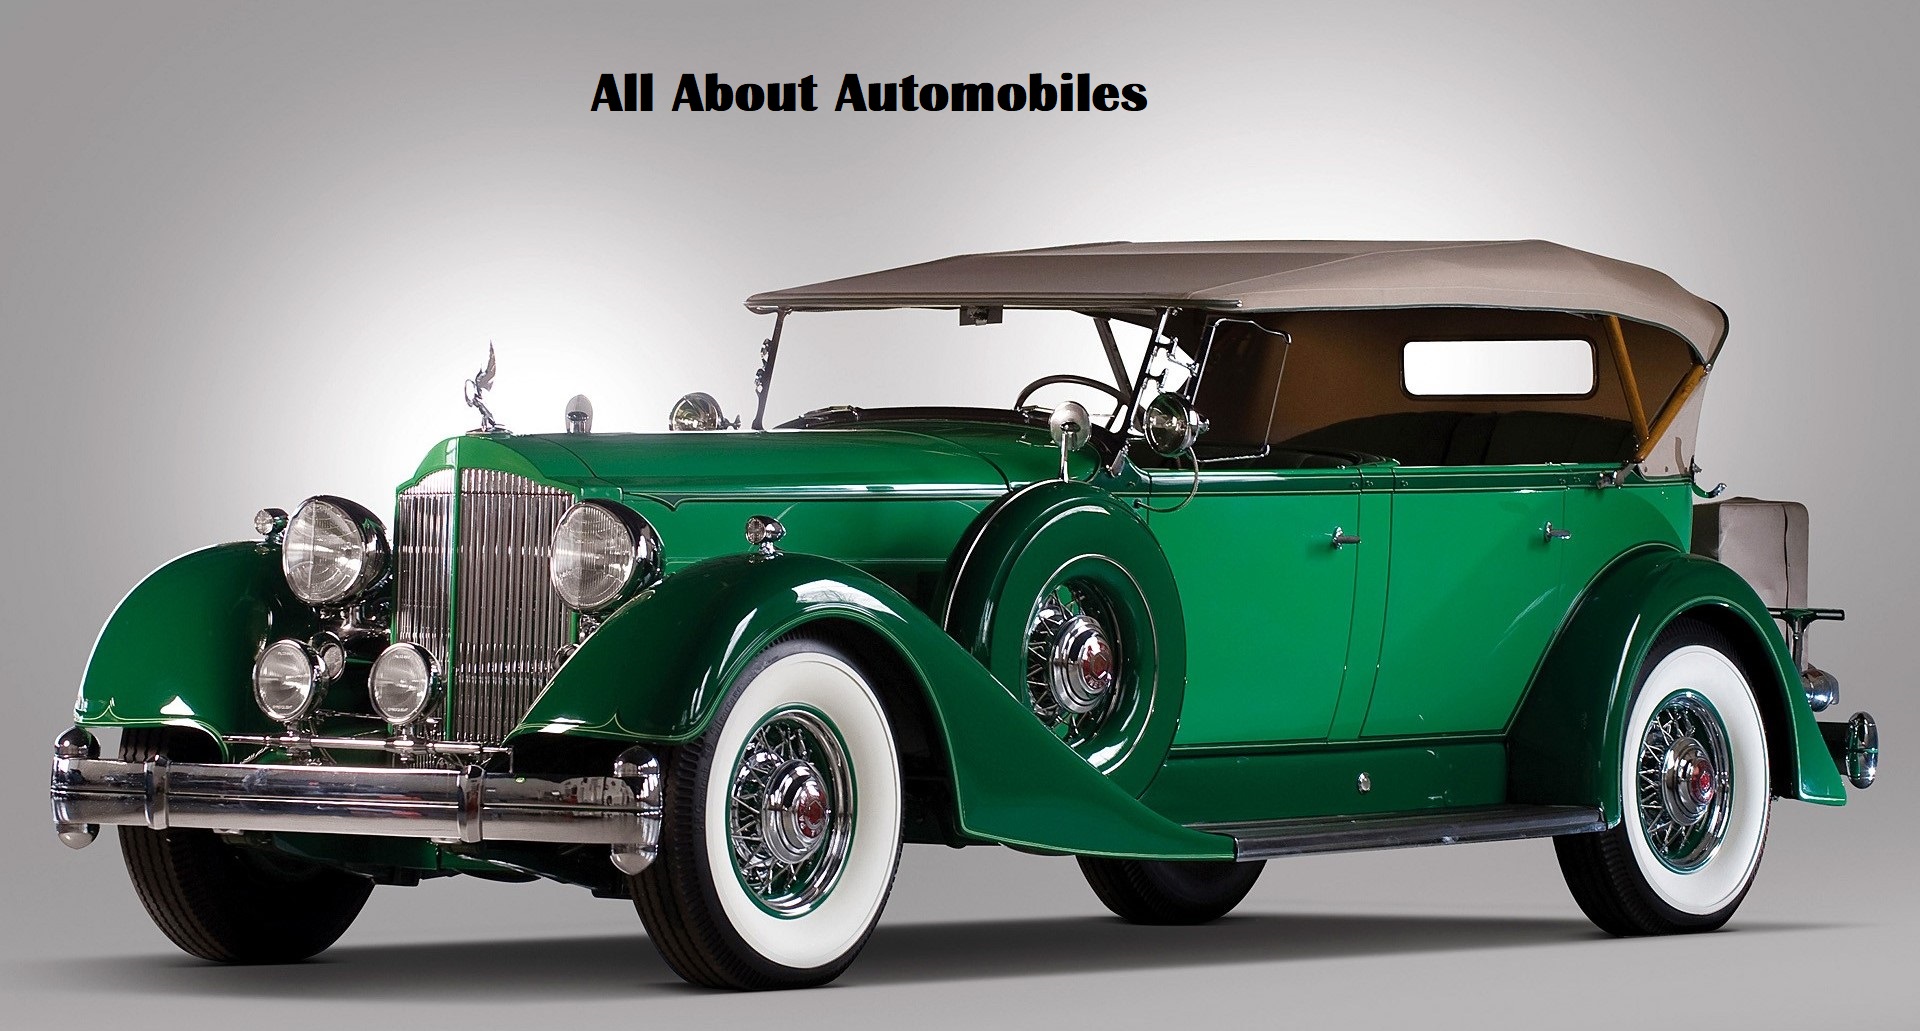 All About Automobiles